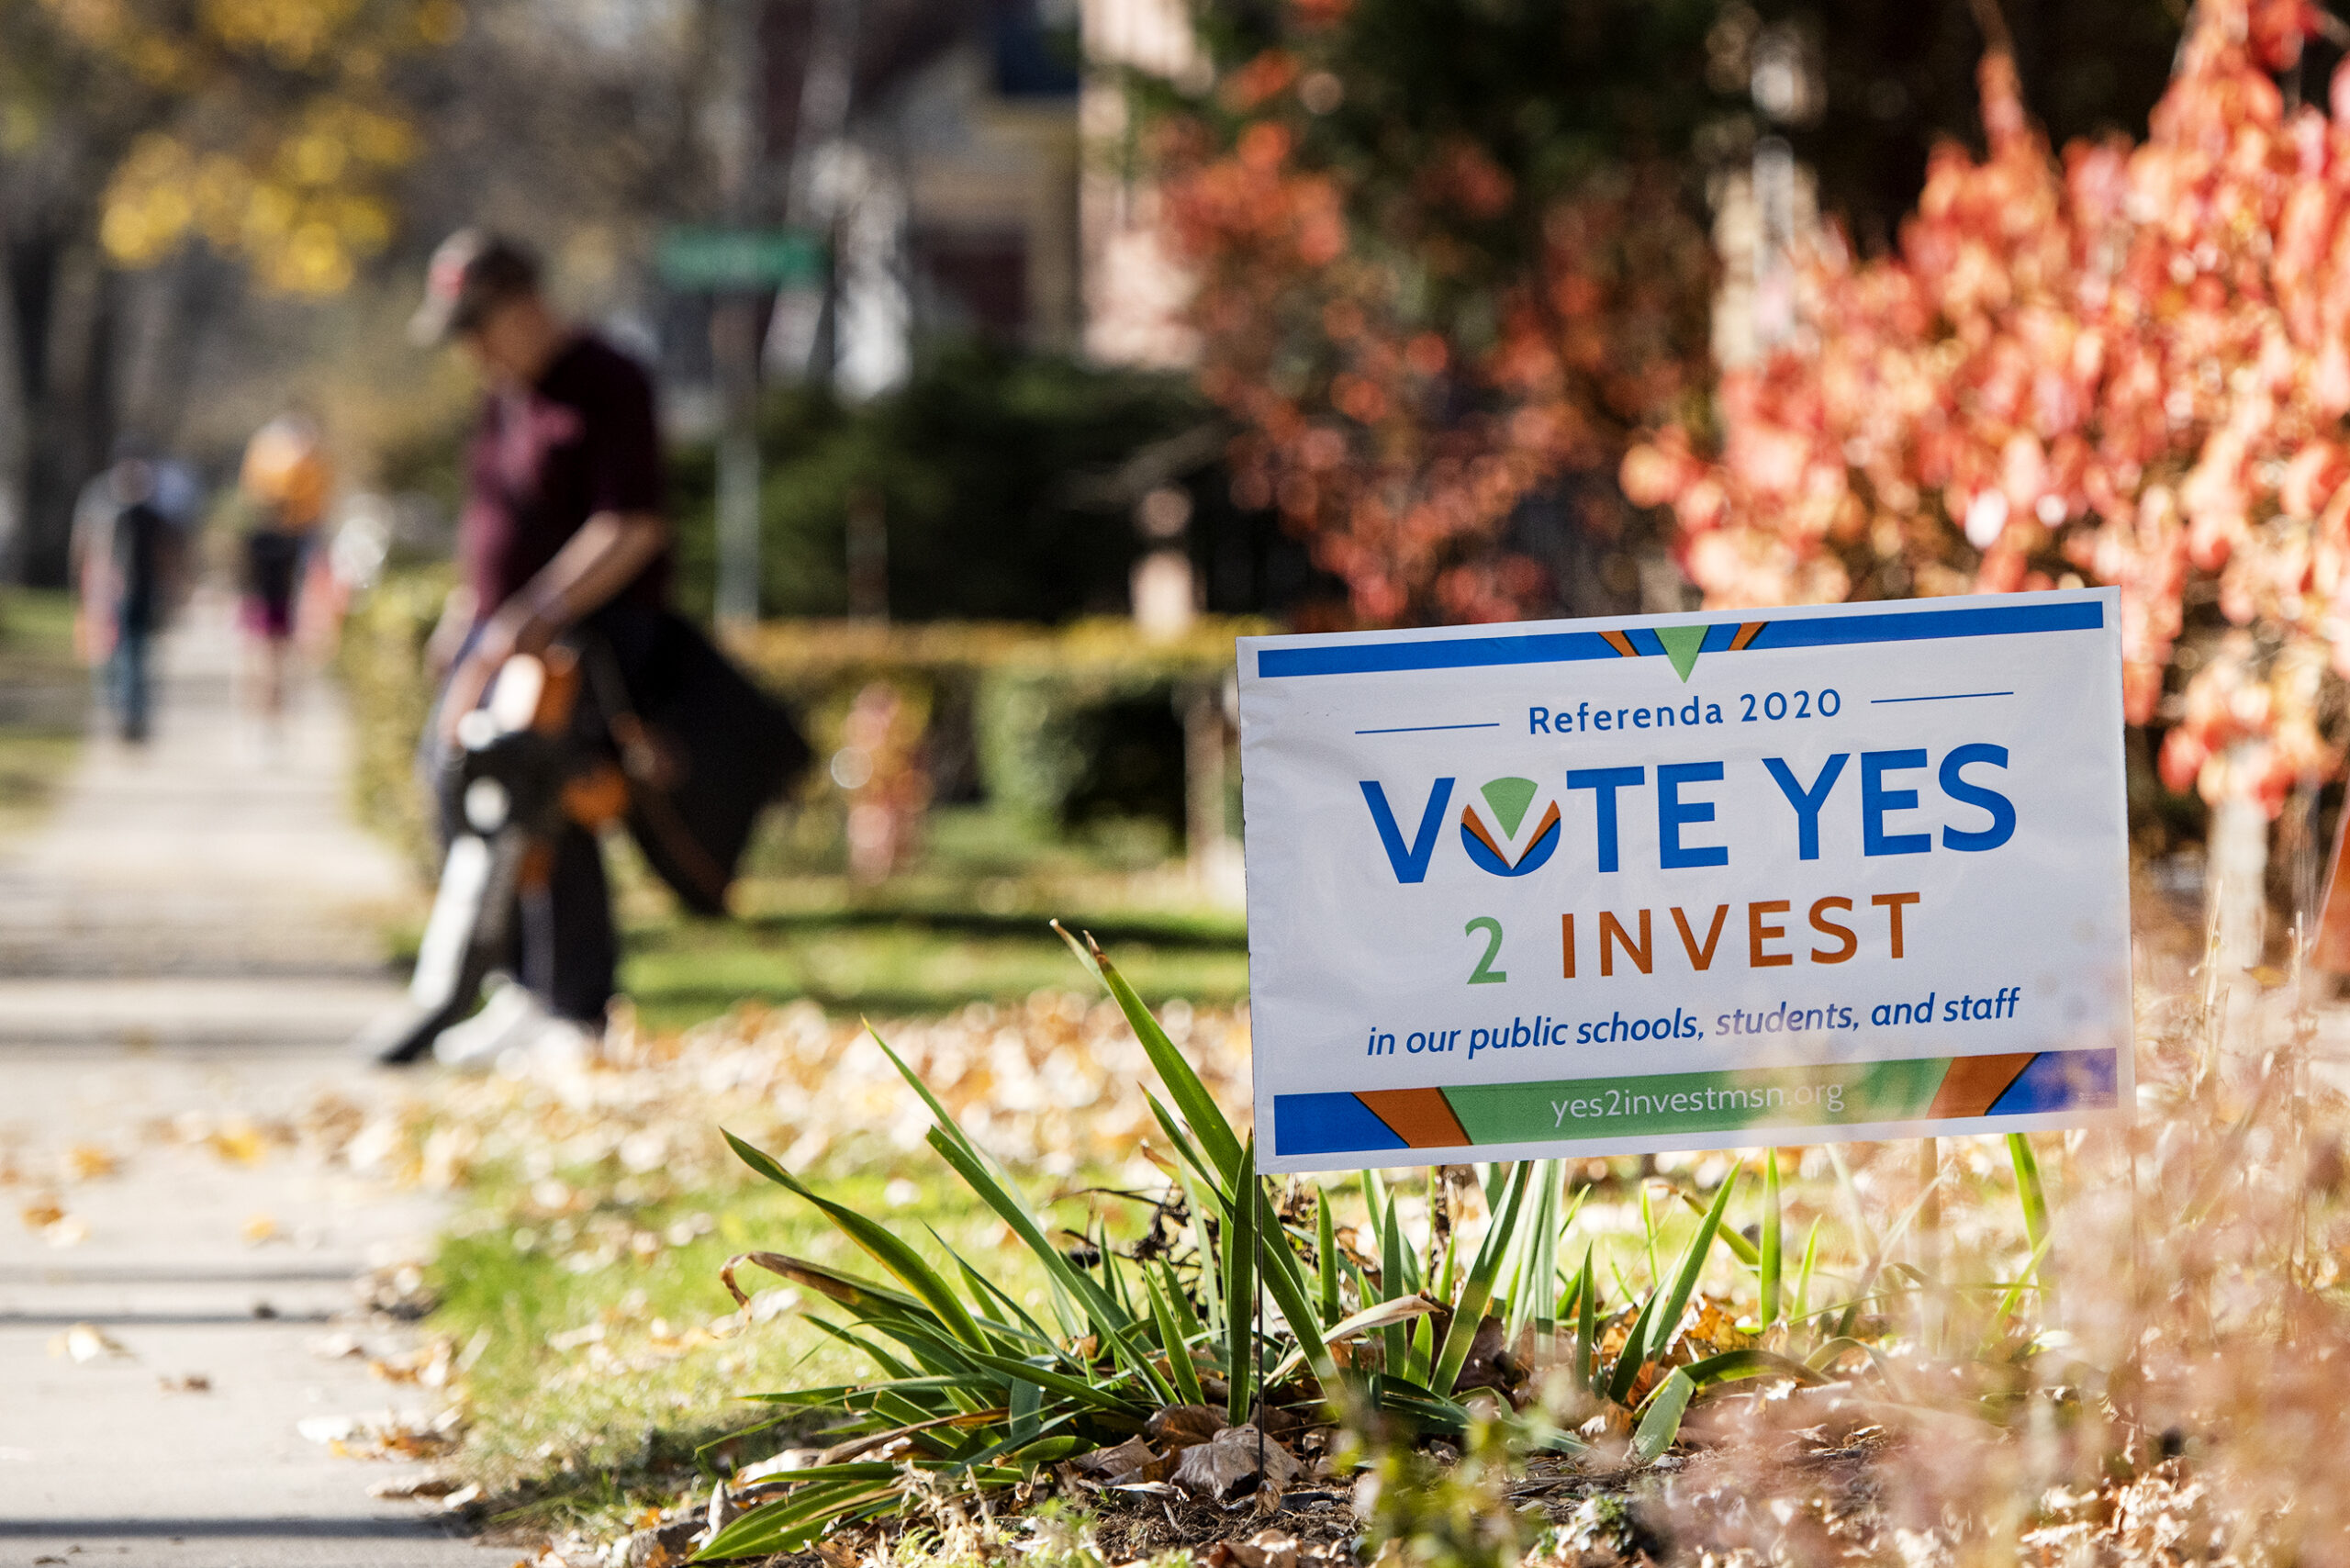 a sign says "Vote Yes 2 Invest"